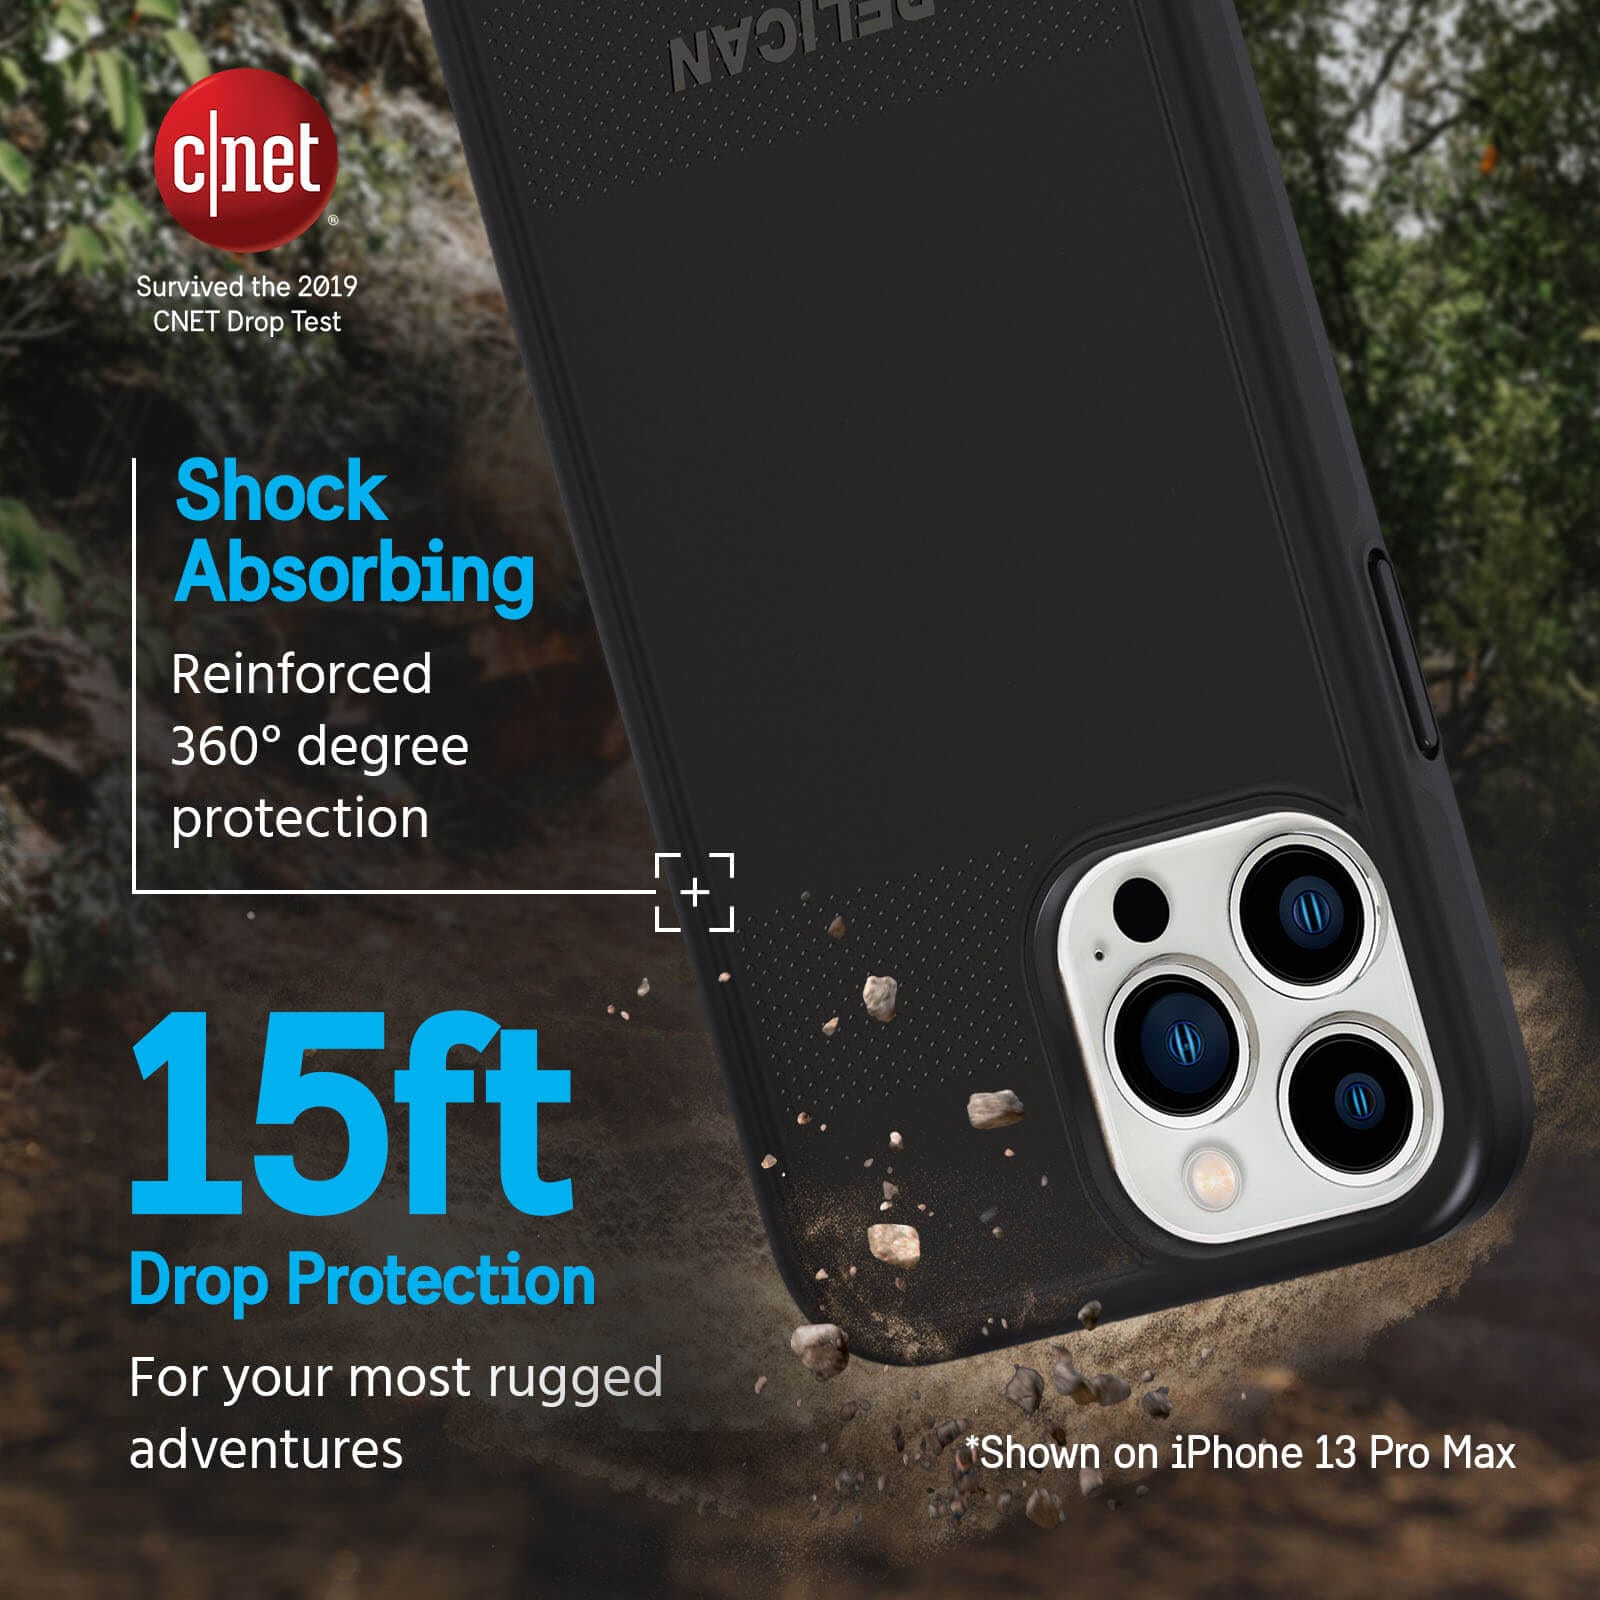 Survived the 2019 CNET Drop Test. Shock Absorbing reinforced 360 degree protection. 15ft Drop Protection for your most rugged adventures. *Shown on iPhone 13 Pro Max. color::Black